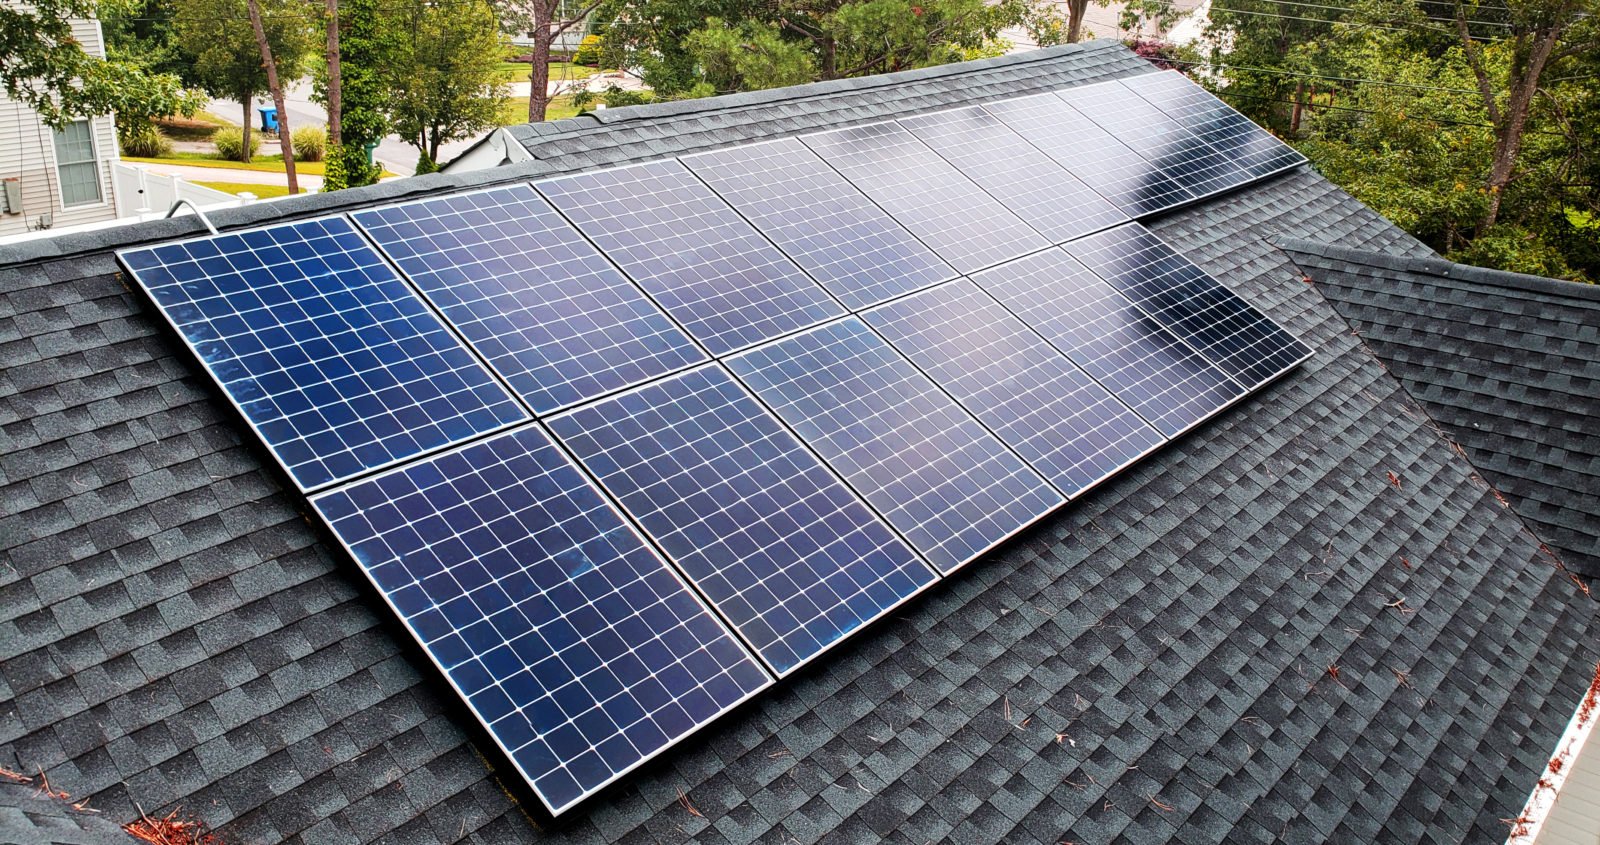 Are Solar Panels Worth it in 2020?